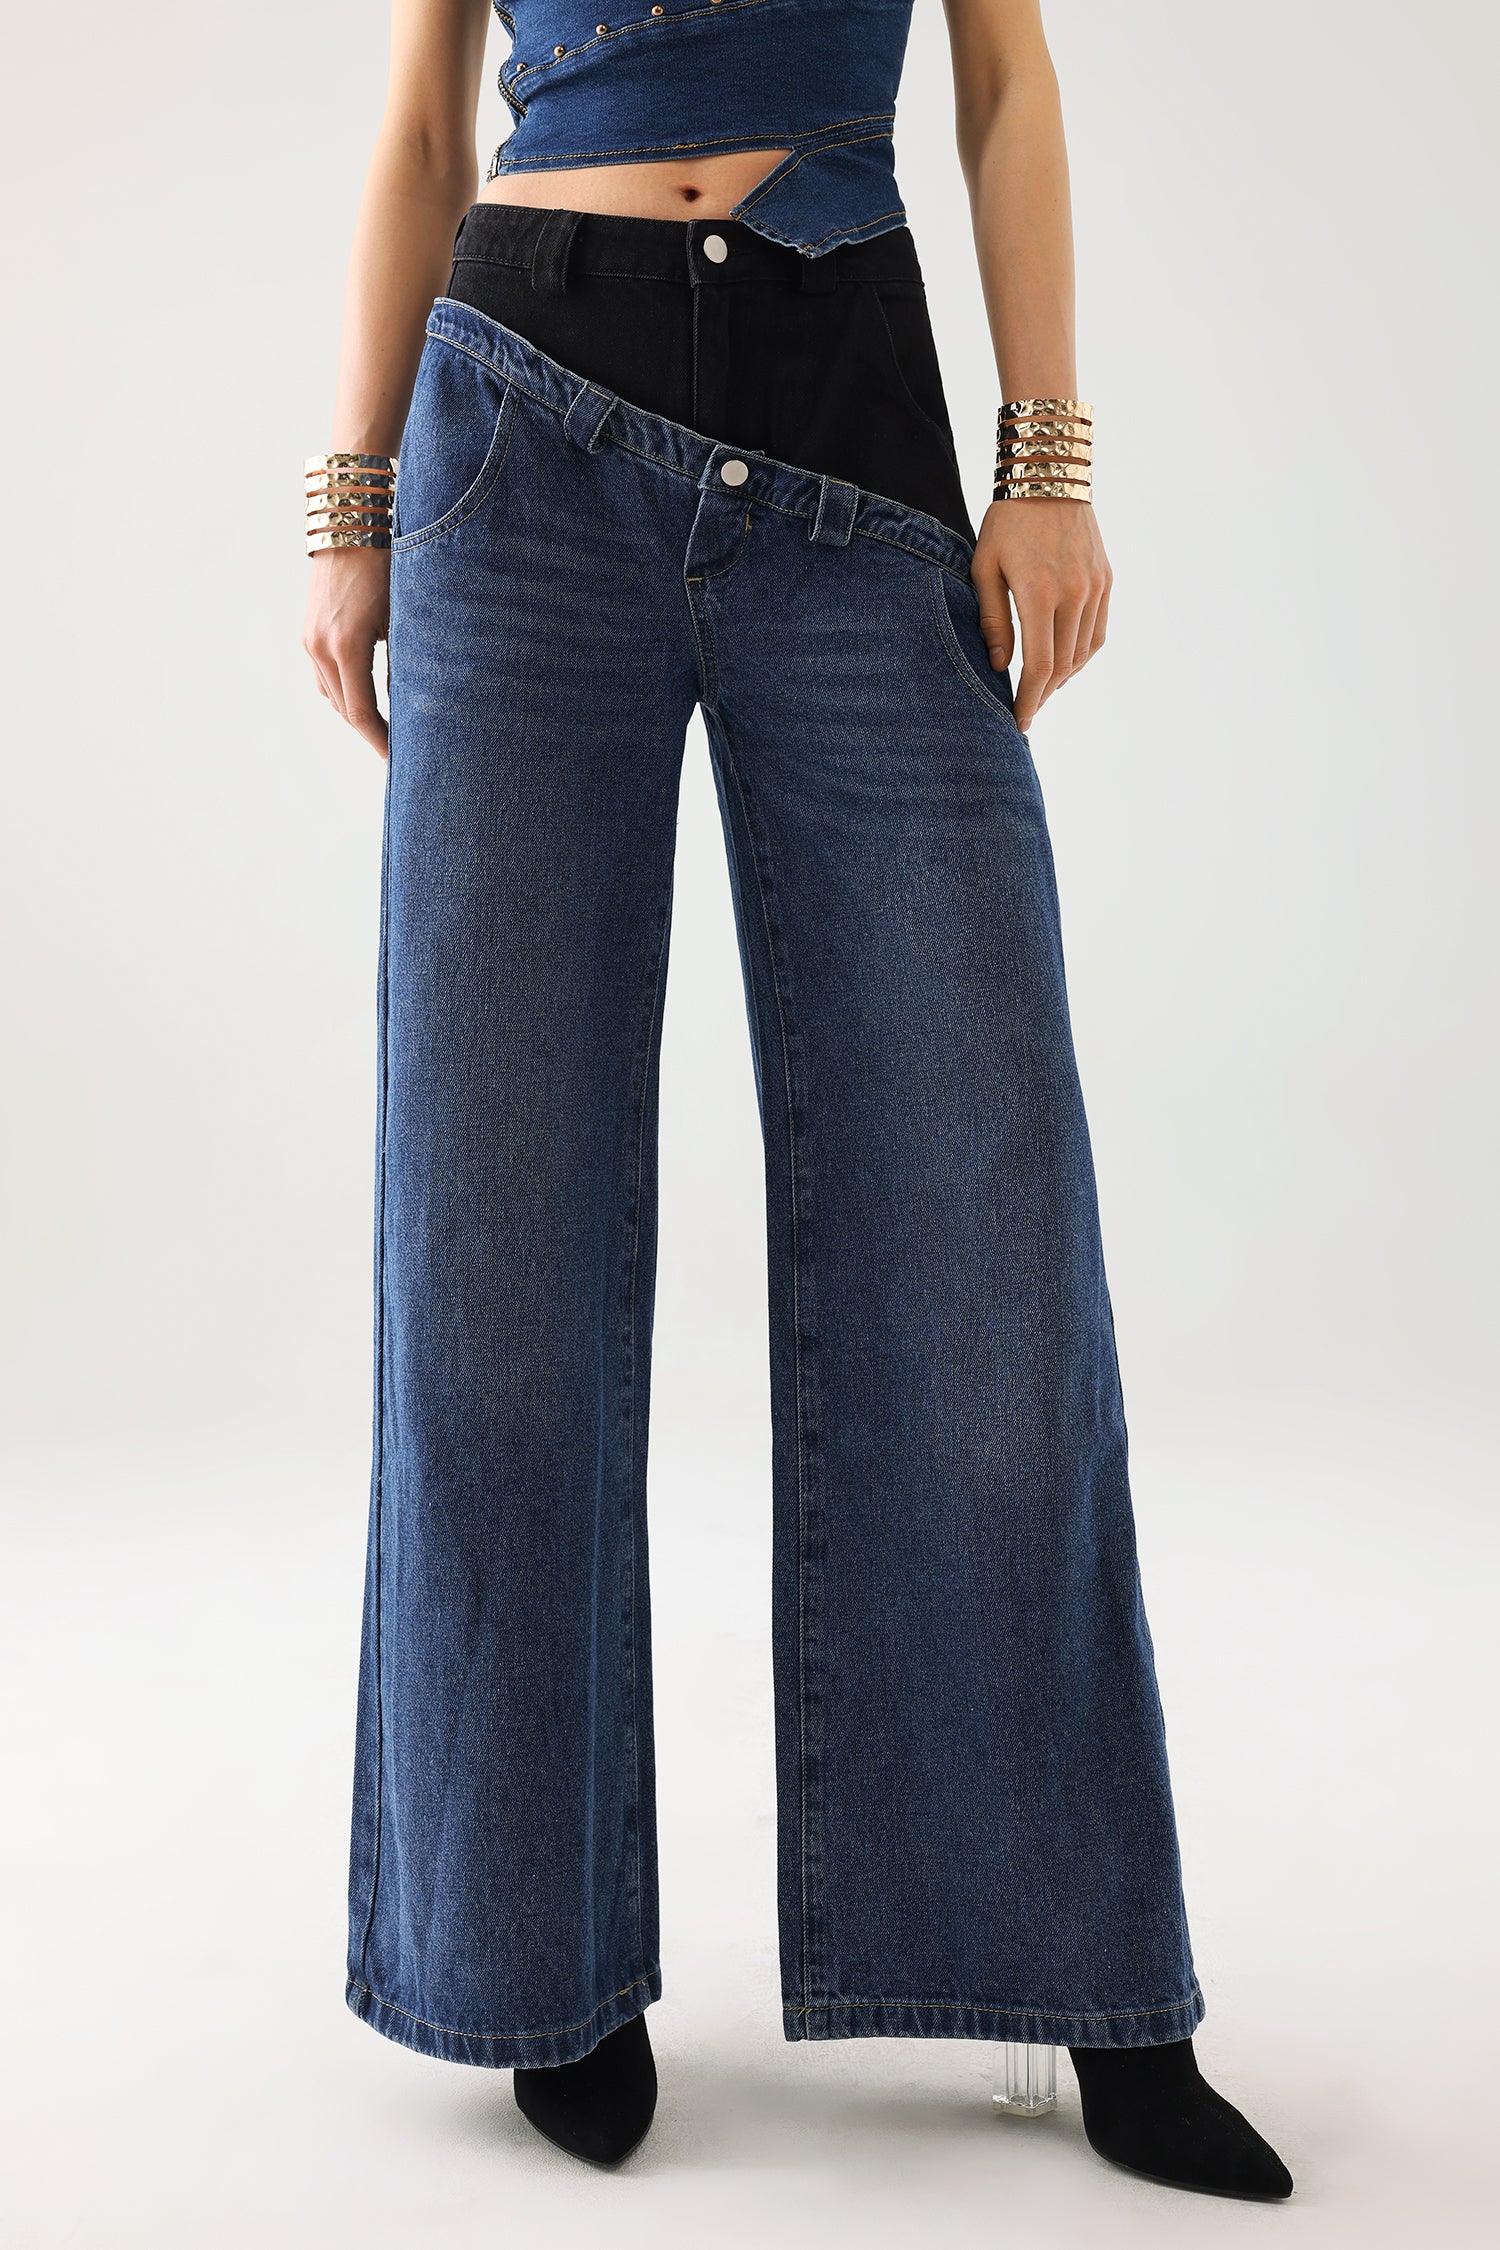 Tabitha Patchwork Jeans